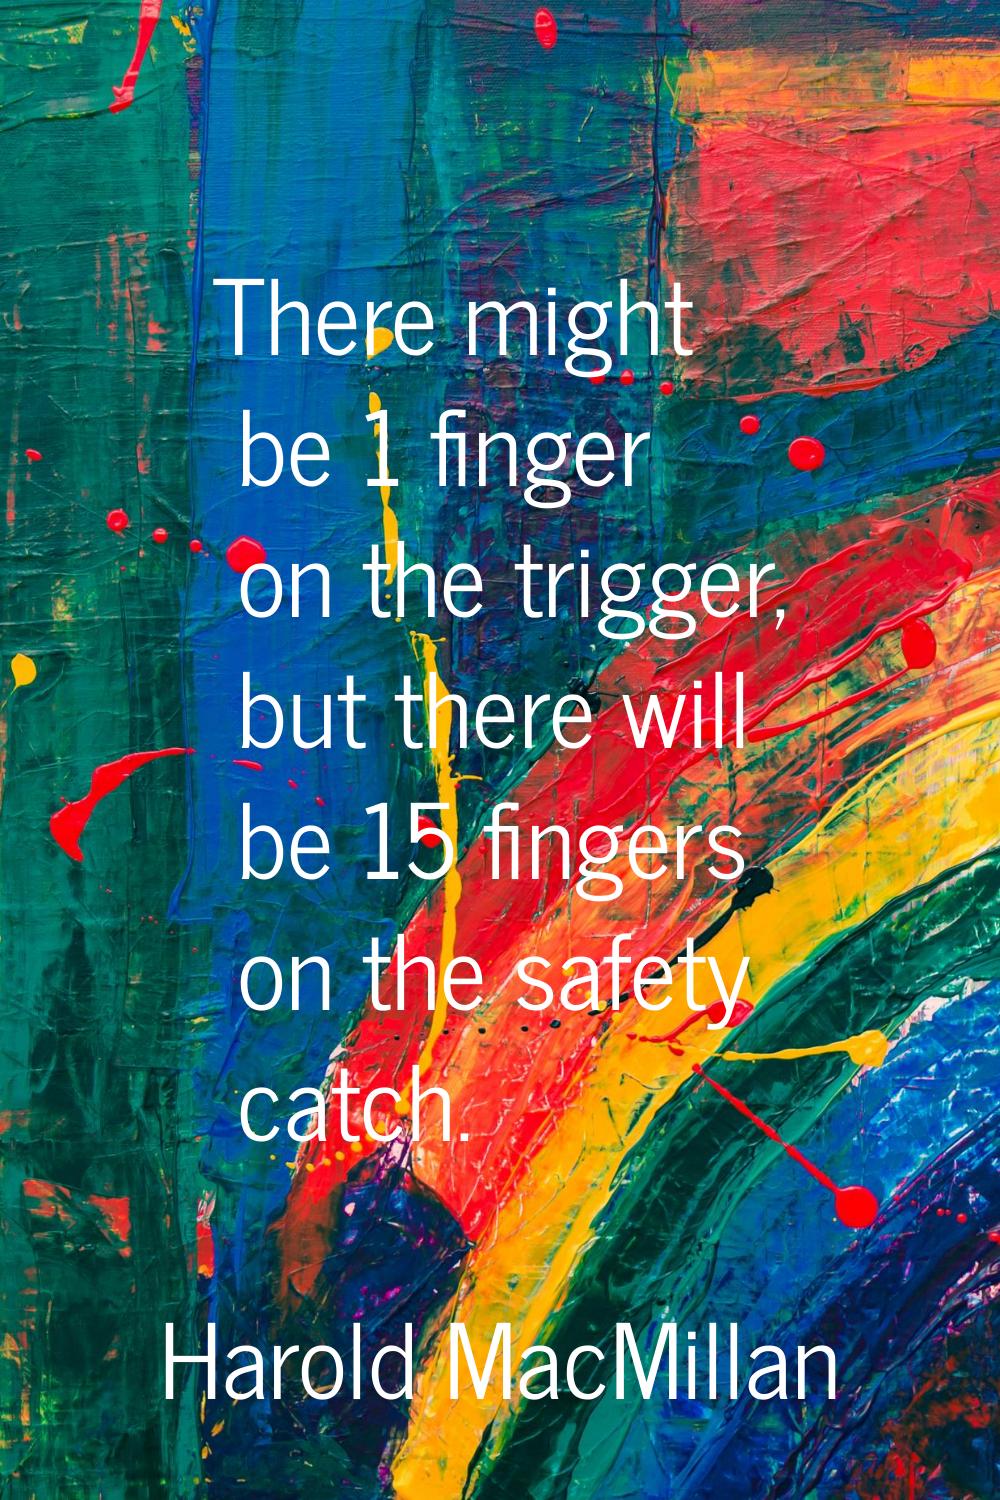 There might be 1 finger on the trigger, but there will be 15 fingers on the safety catch.